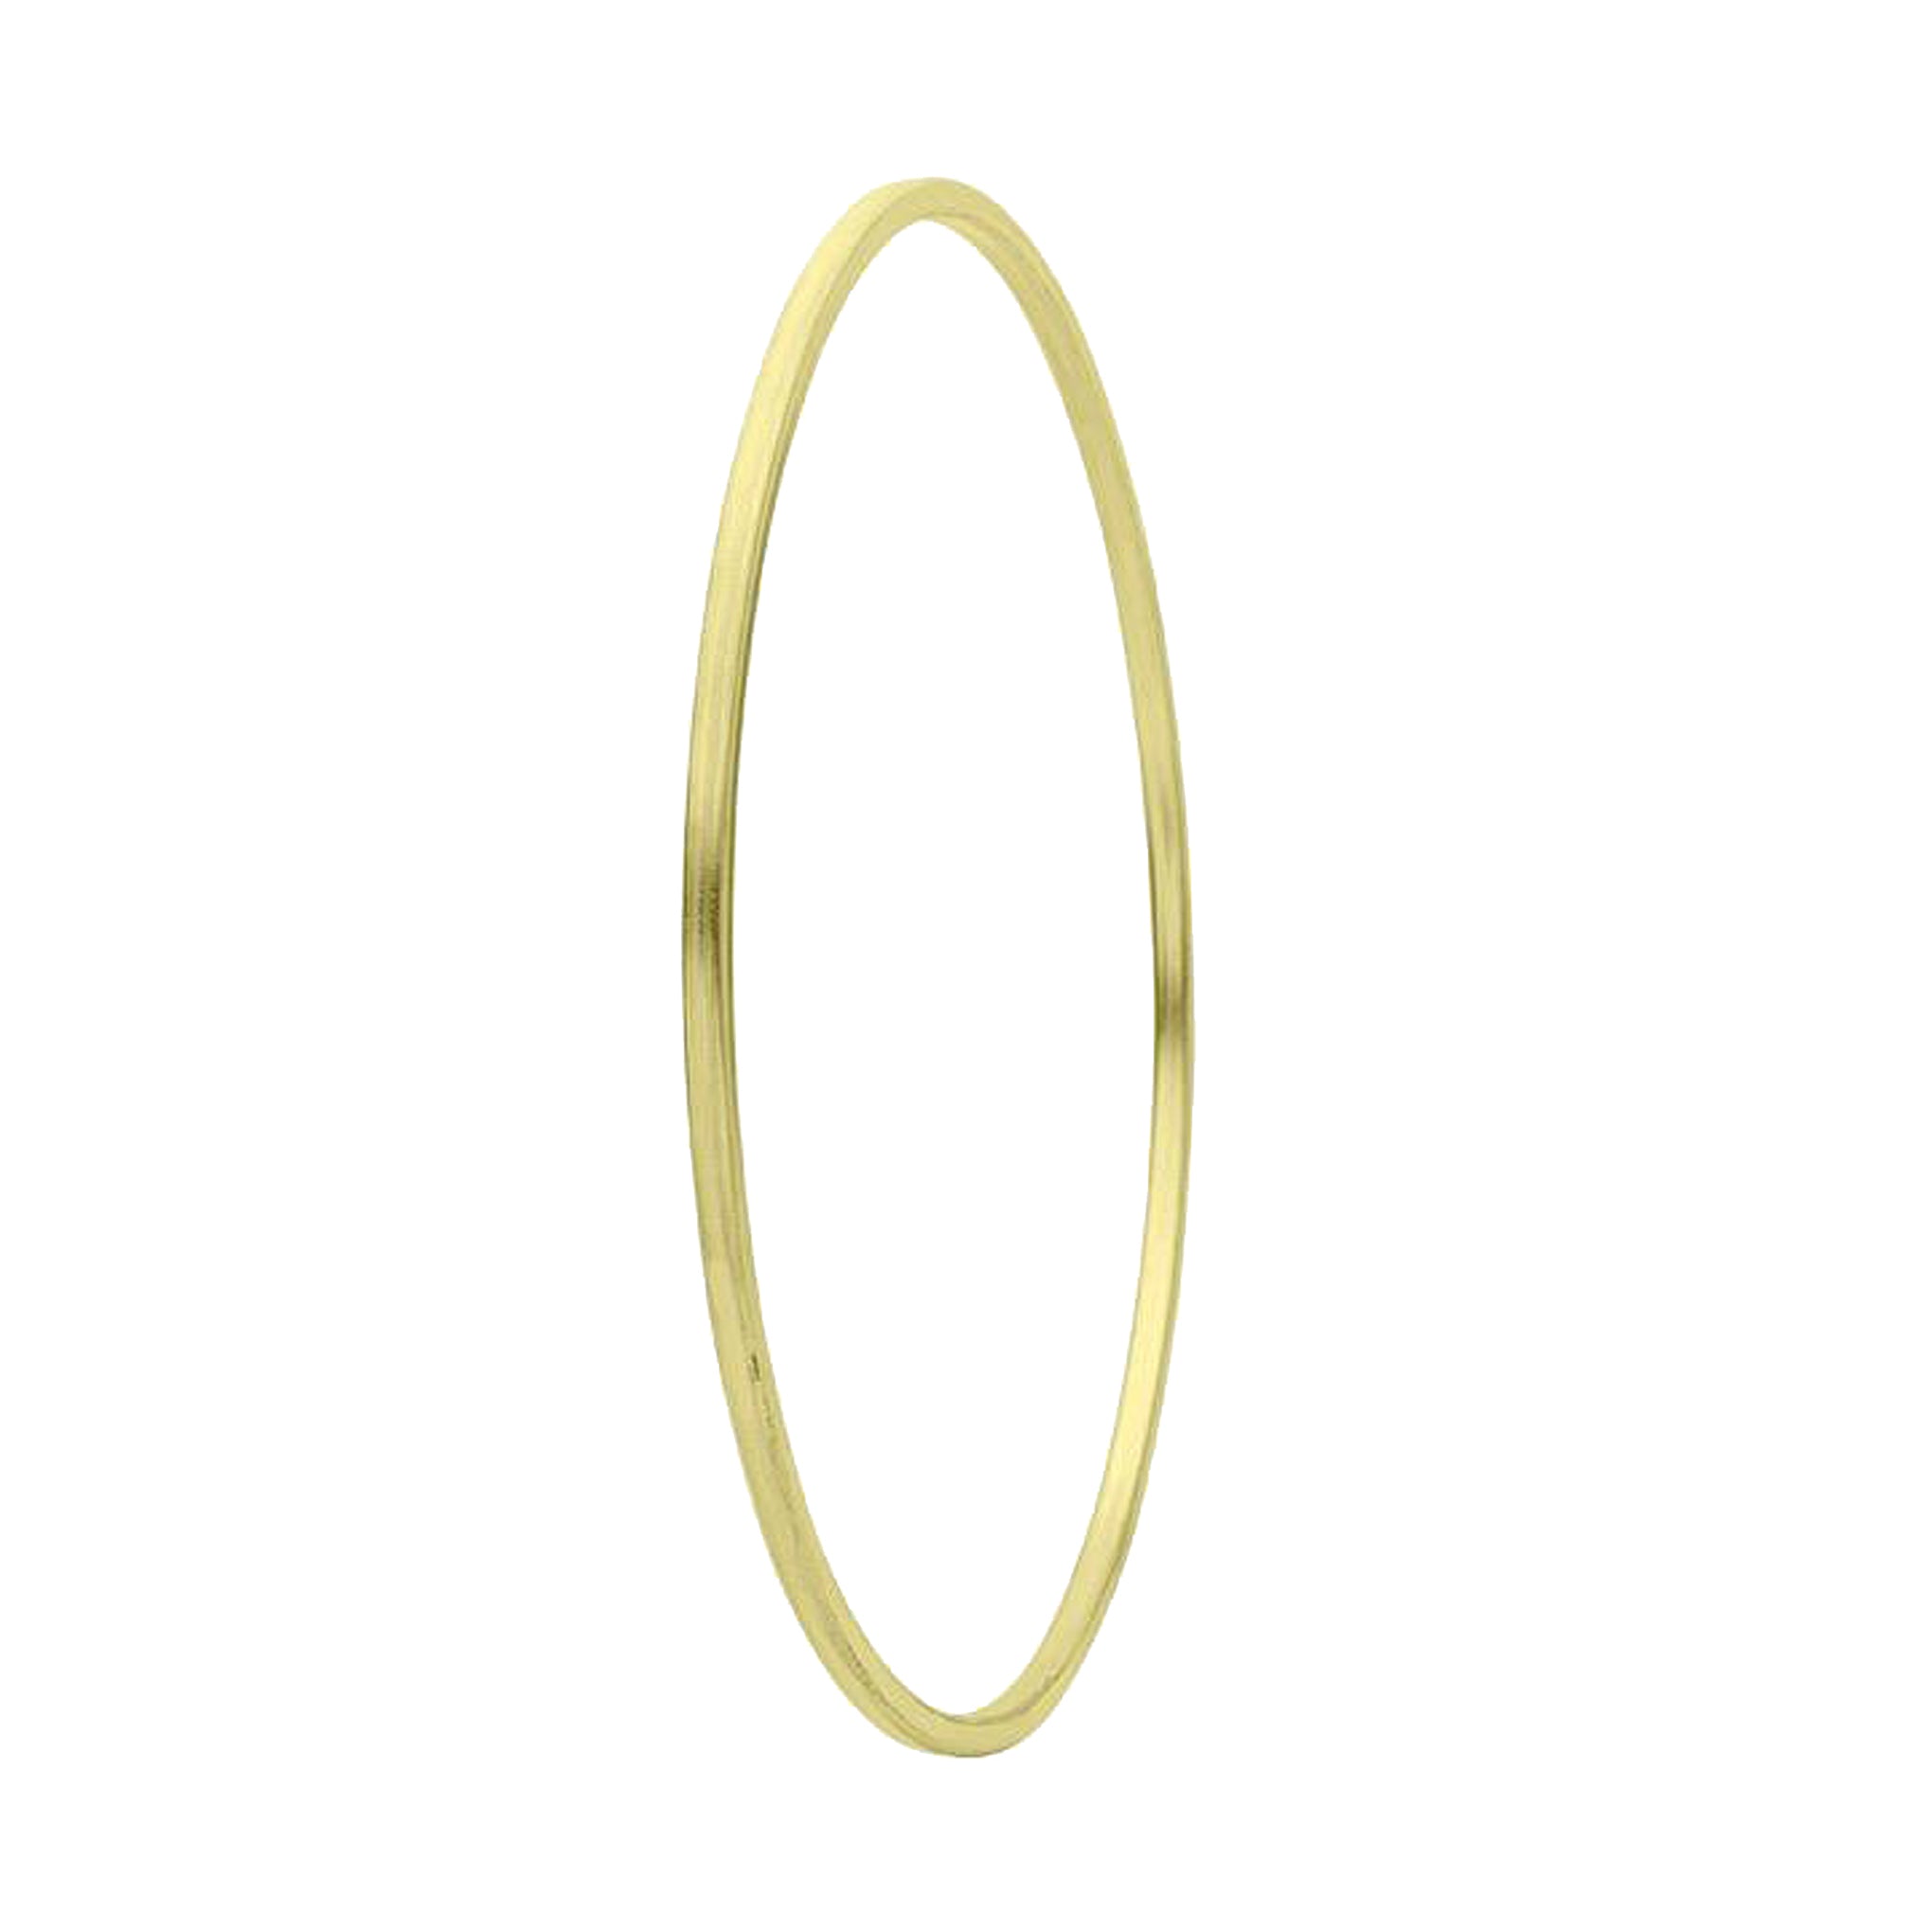 Sheila Fajl Thin Flat Square Bangle in Gold Plated